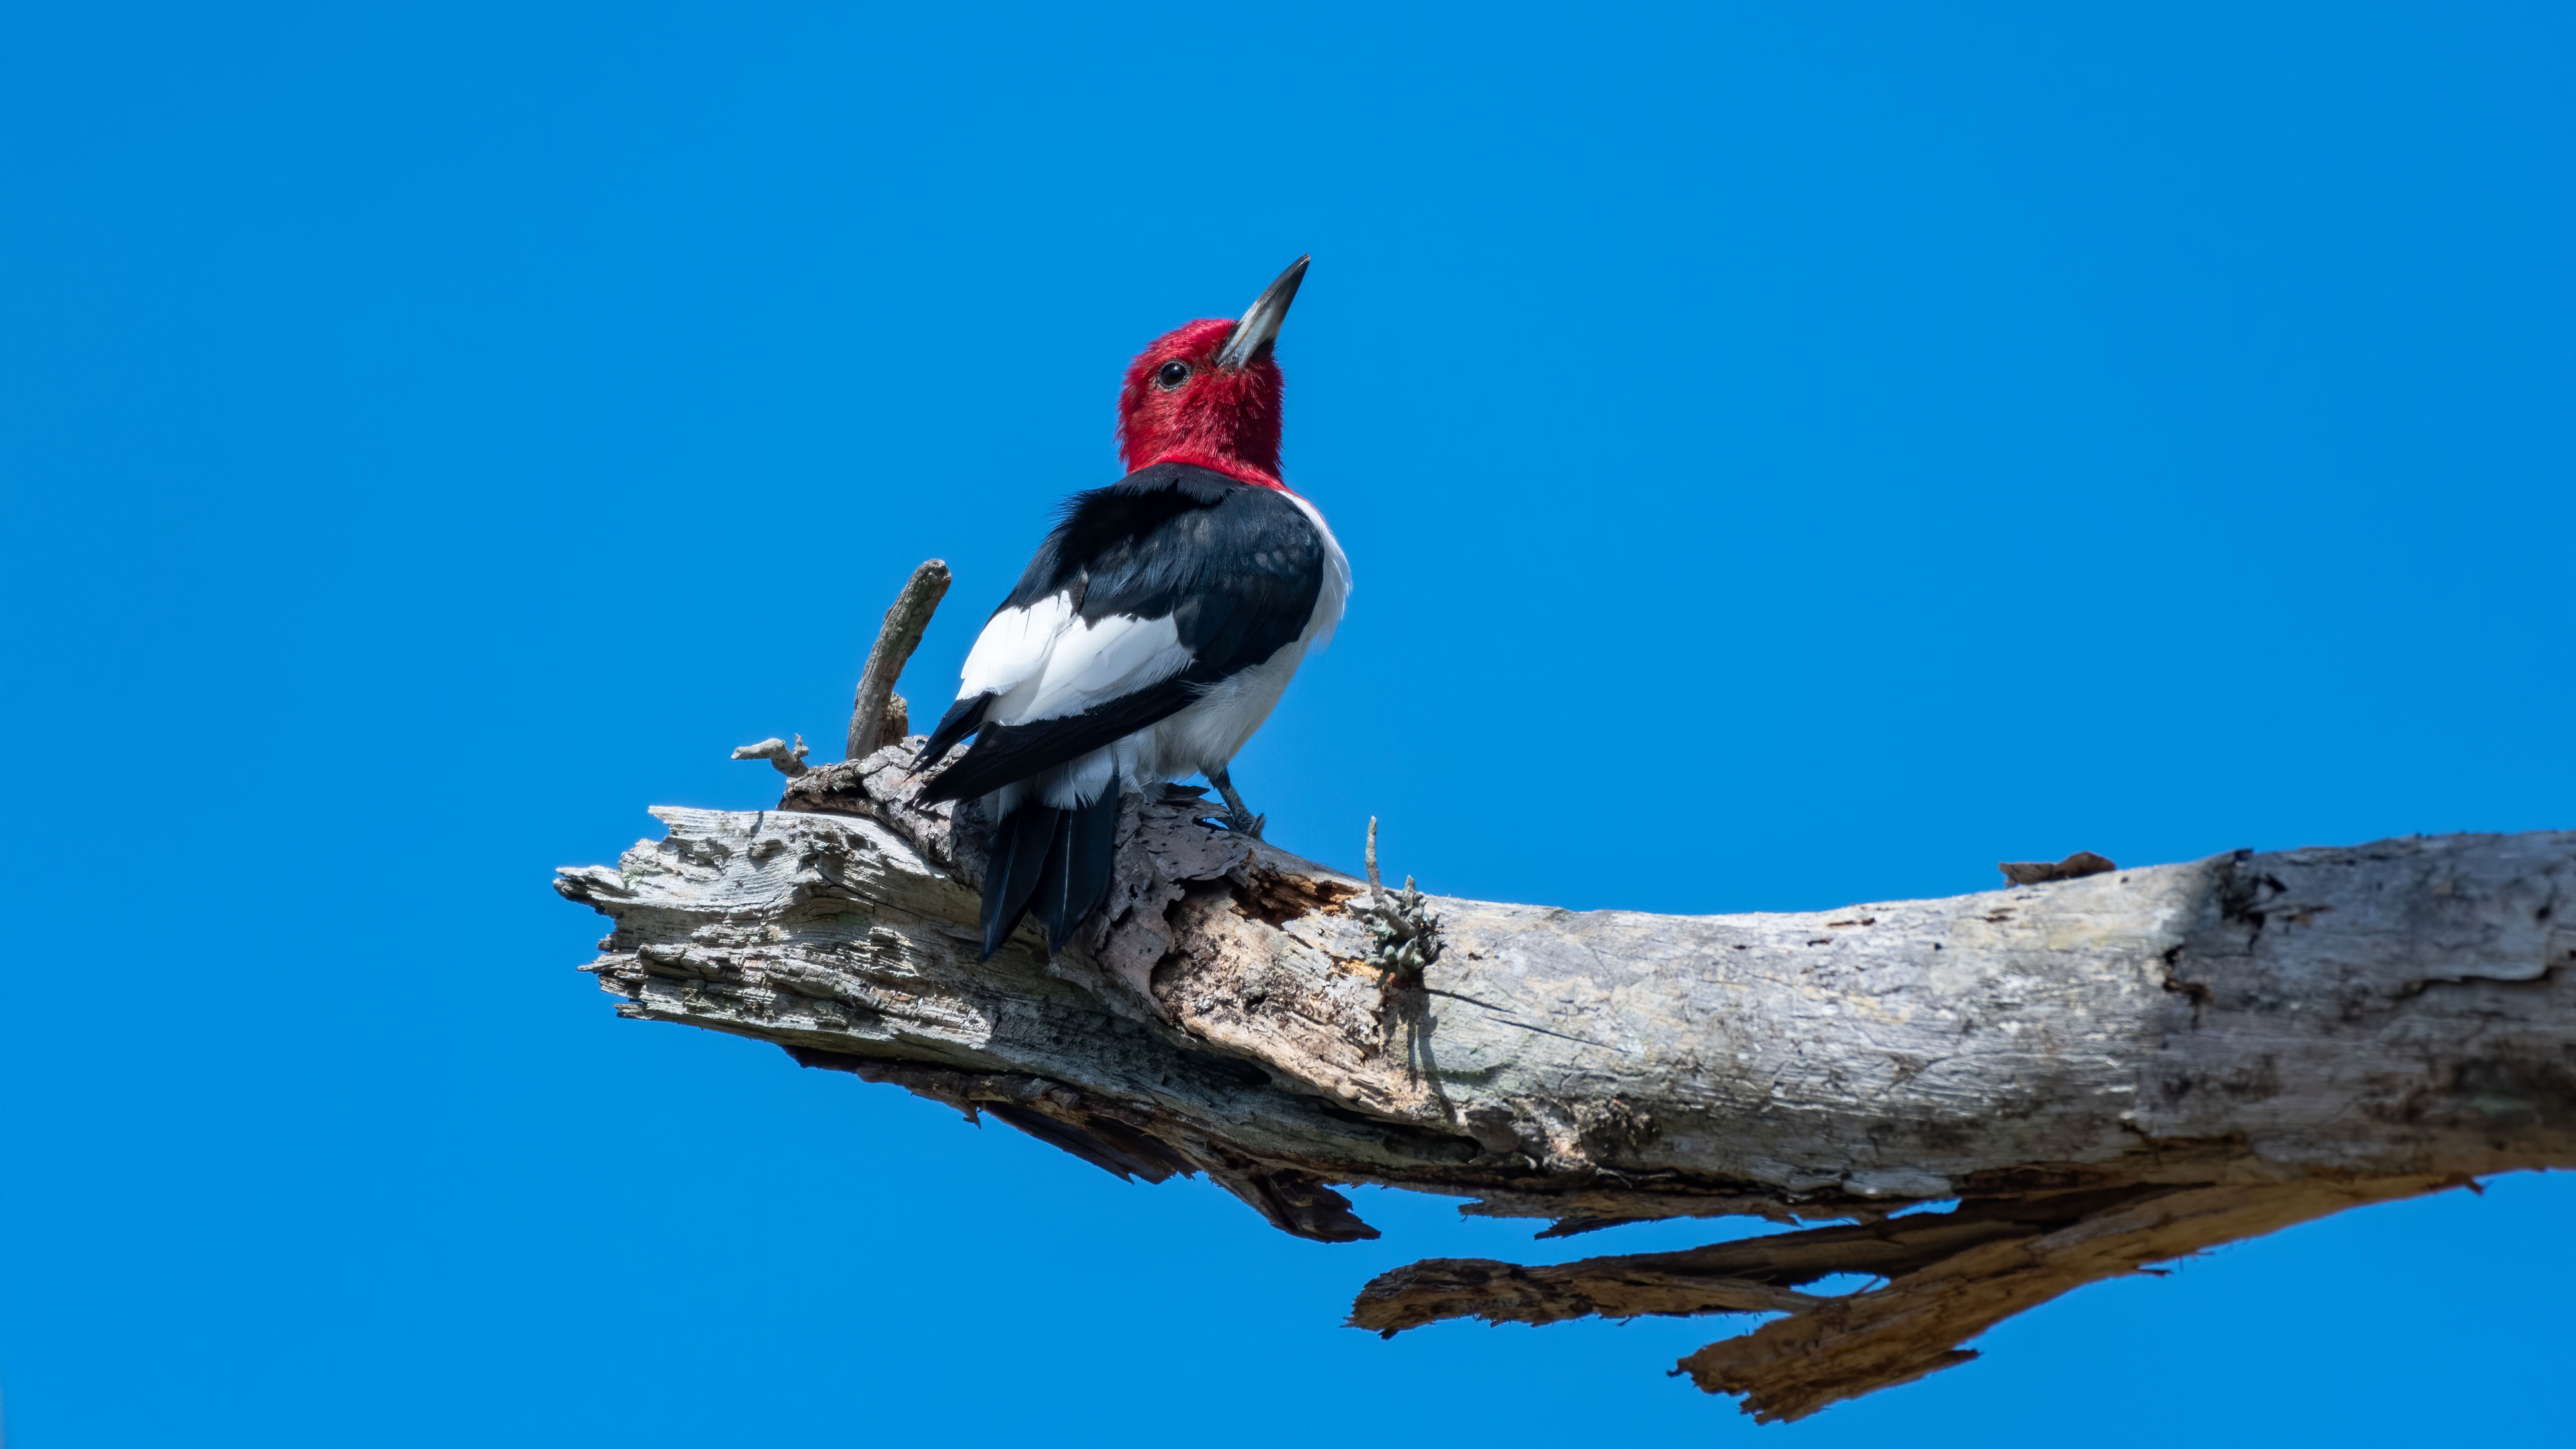 A red-headed woodpecker on a branch.